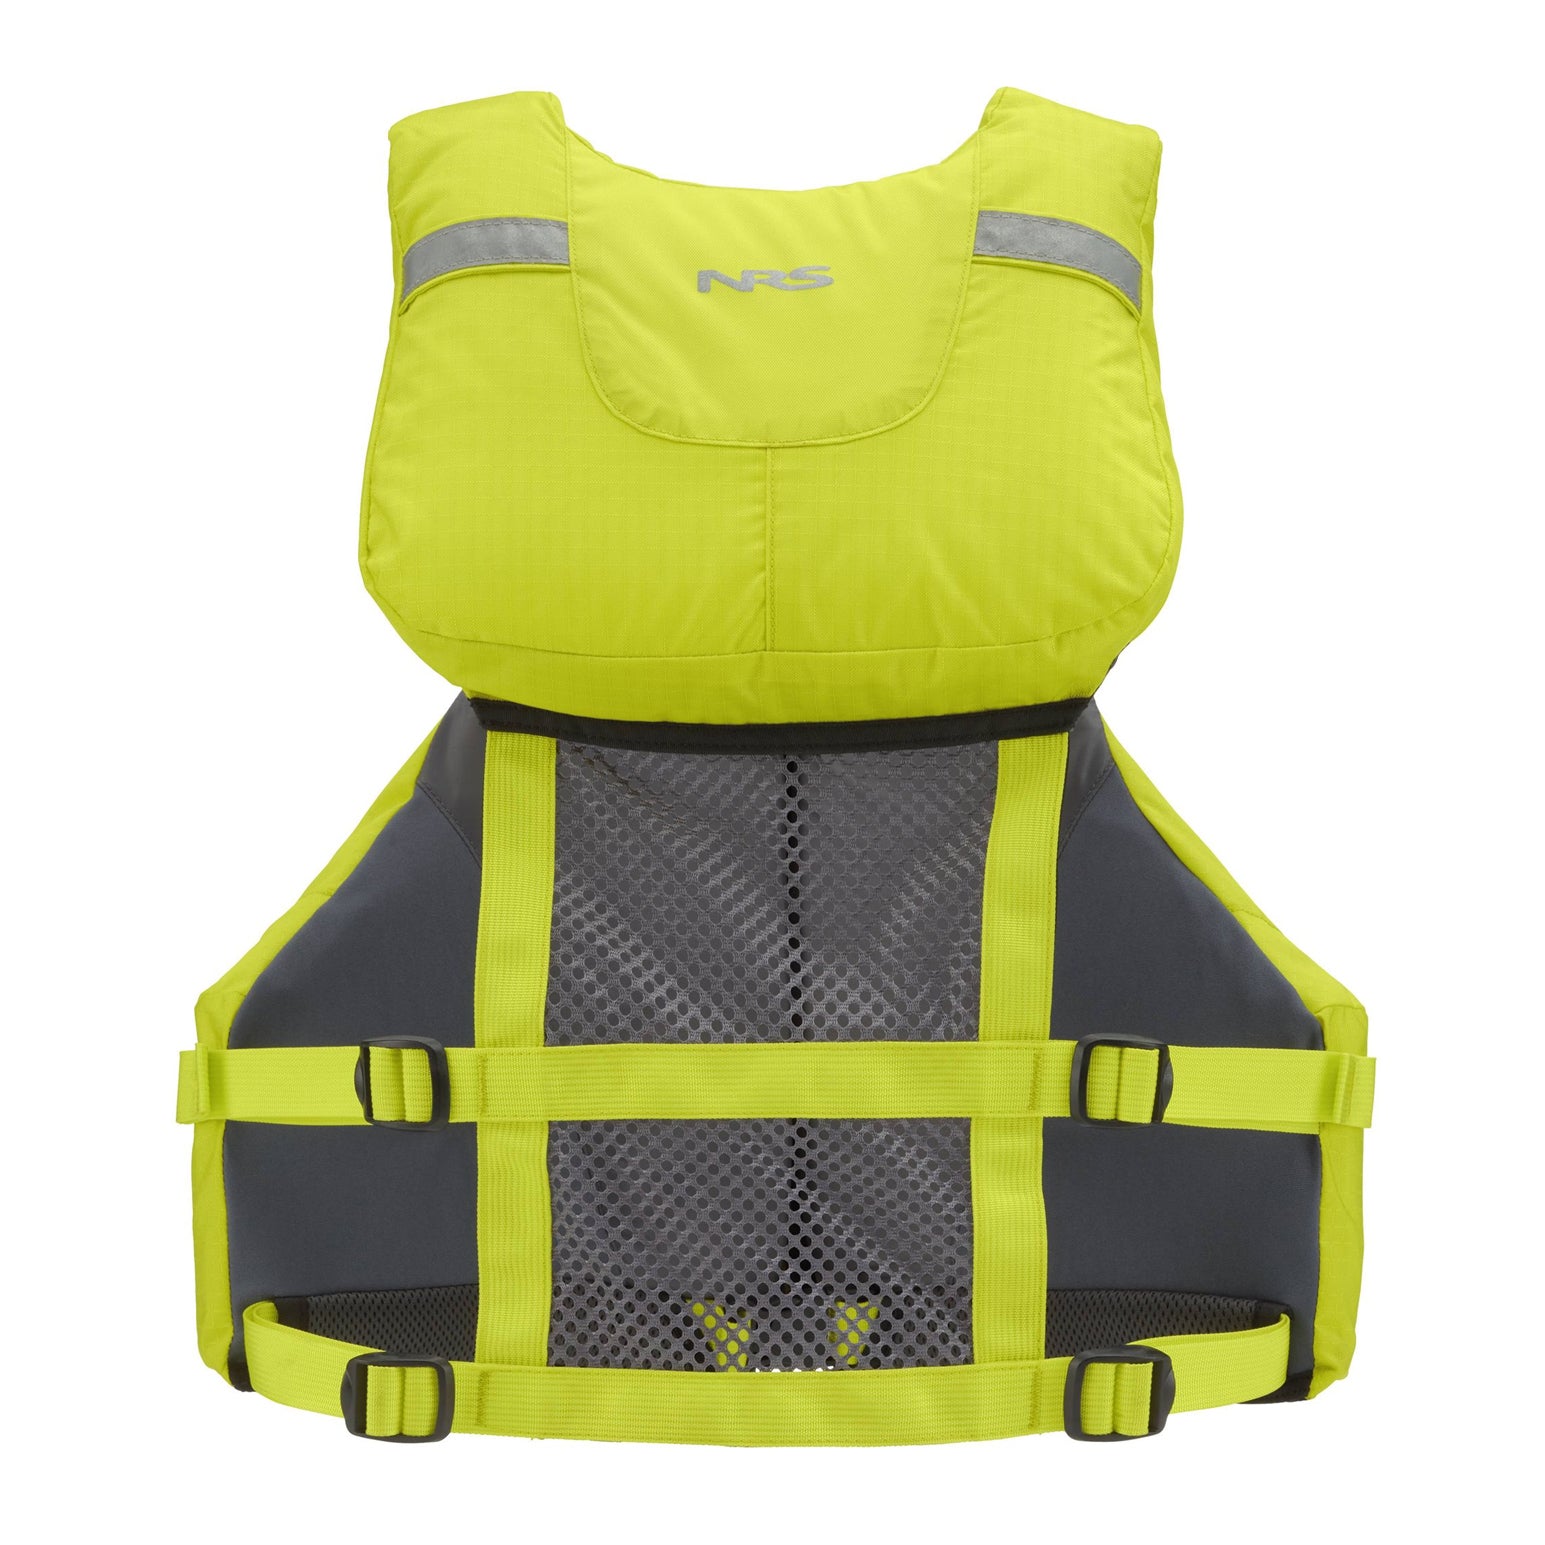 High Back Buoyancy Aid design and mesh back panel for maximum ventilation